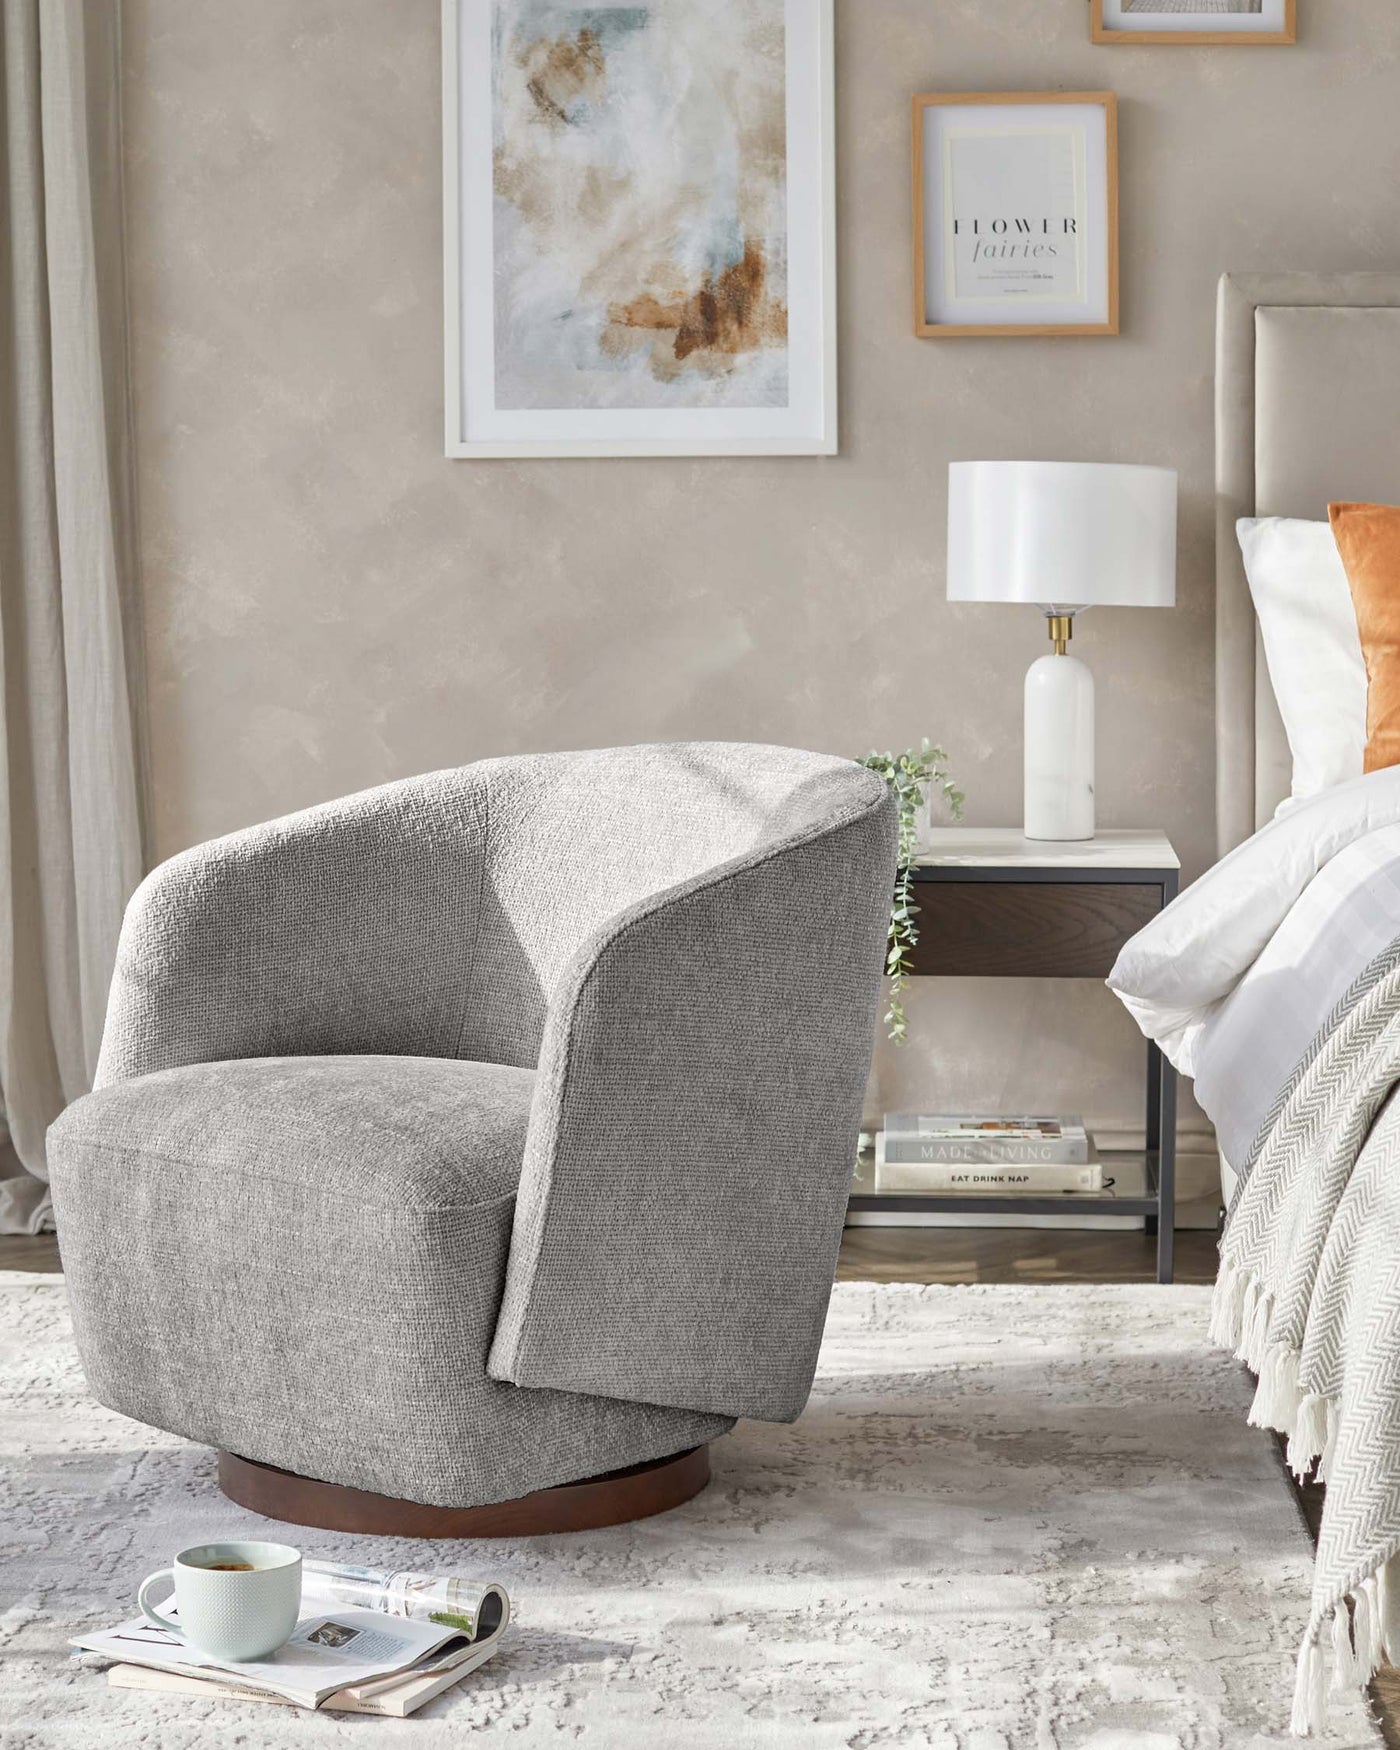 Modern textured grey fabric swivel chair with curved back and a deep, cushioned seat on a round, dark wooden base, paired with a sleek white cylindrical bedside lamp with a white shade on a minimalist bedside table with a reflective surface and lower shelf holding decorative items.